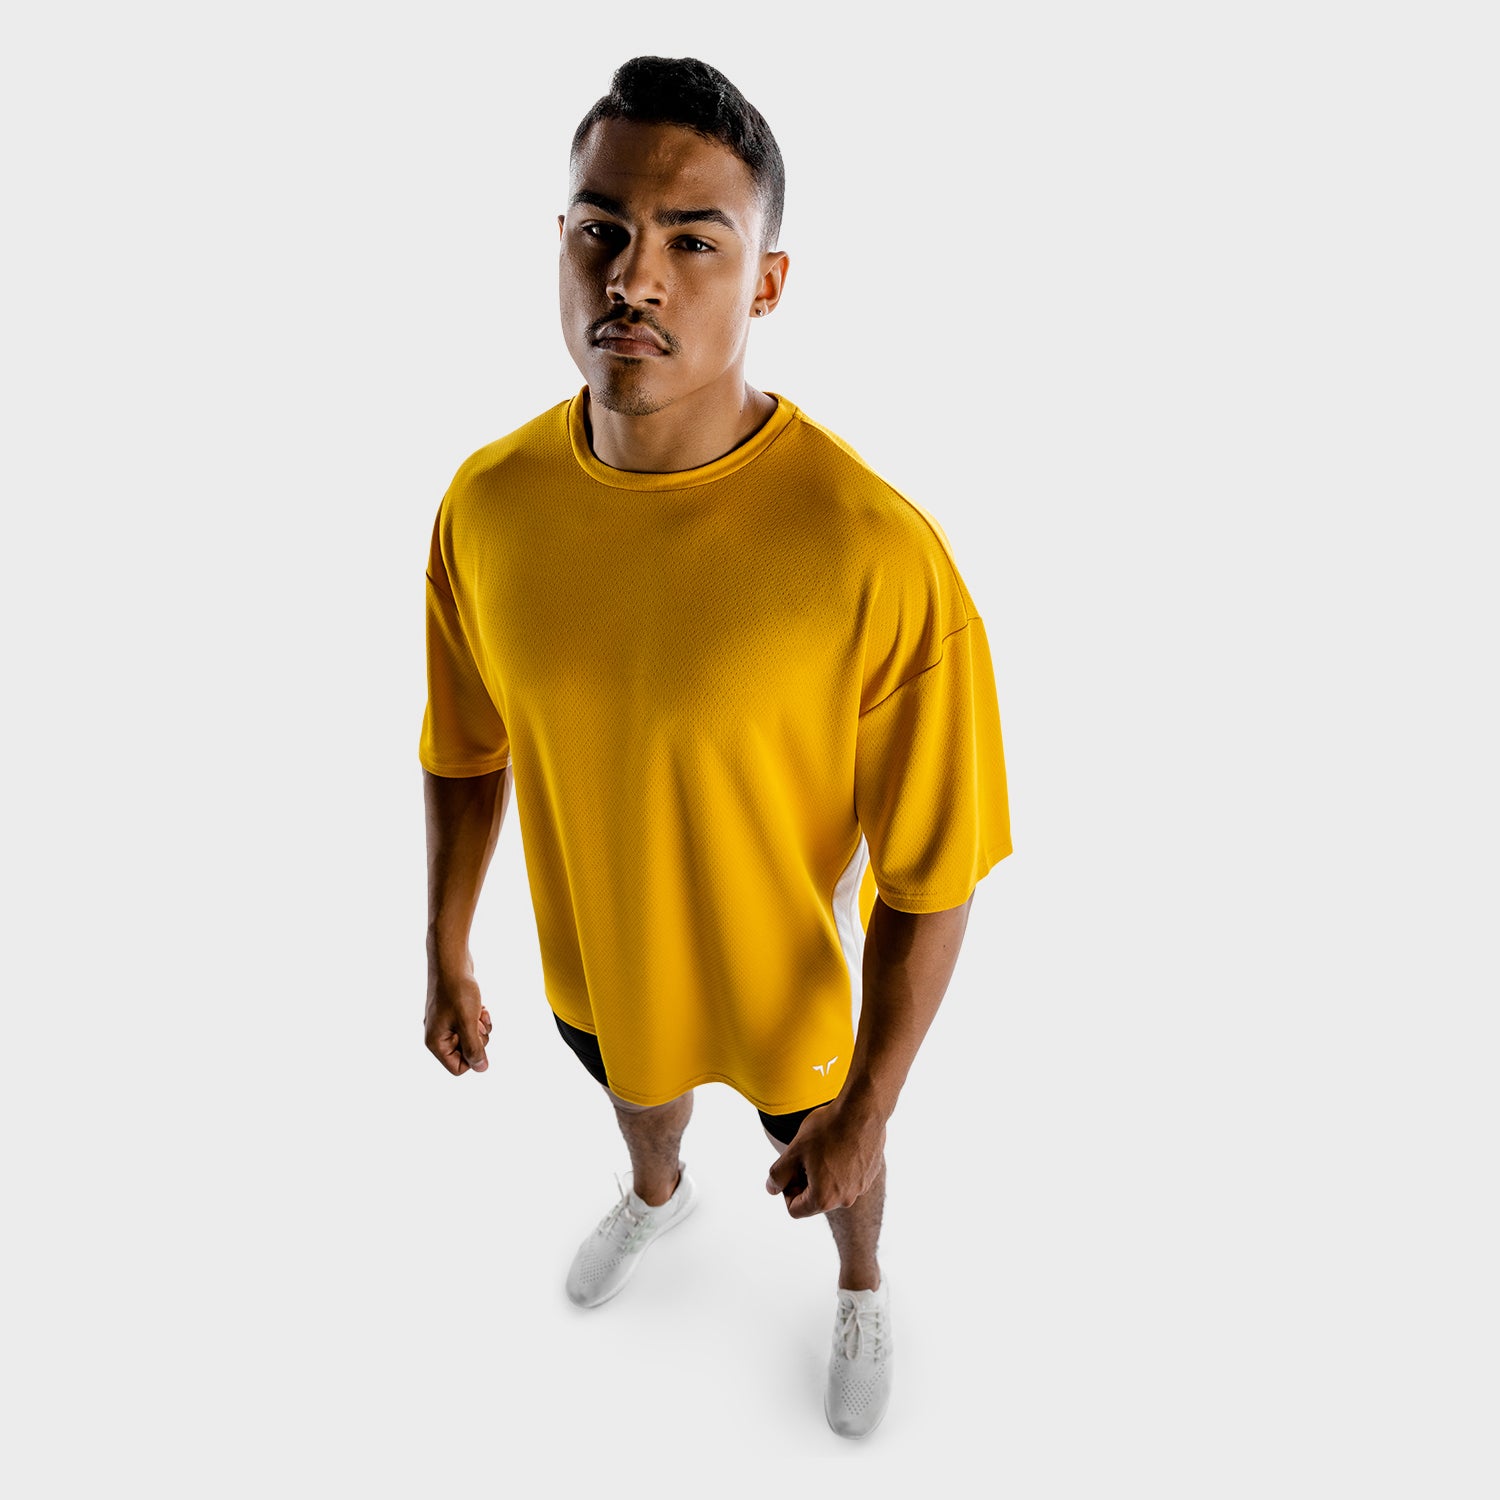 squatwolf-gym-wear-hybrid-2-0-oversize-tee-yellow-workout-shirts-for-men